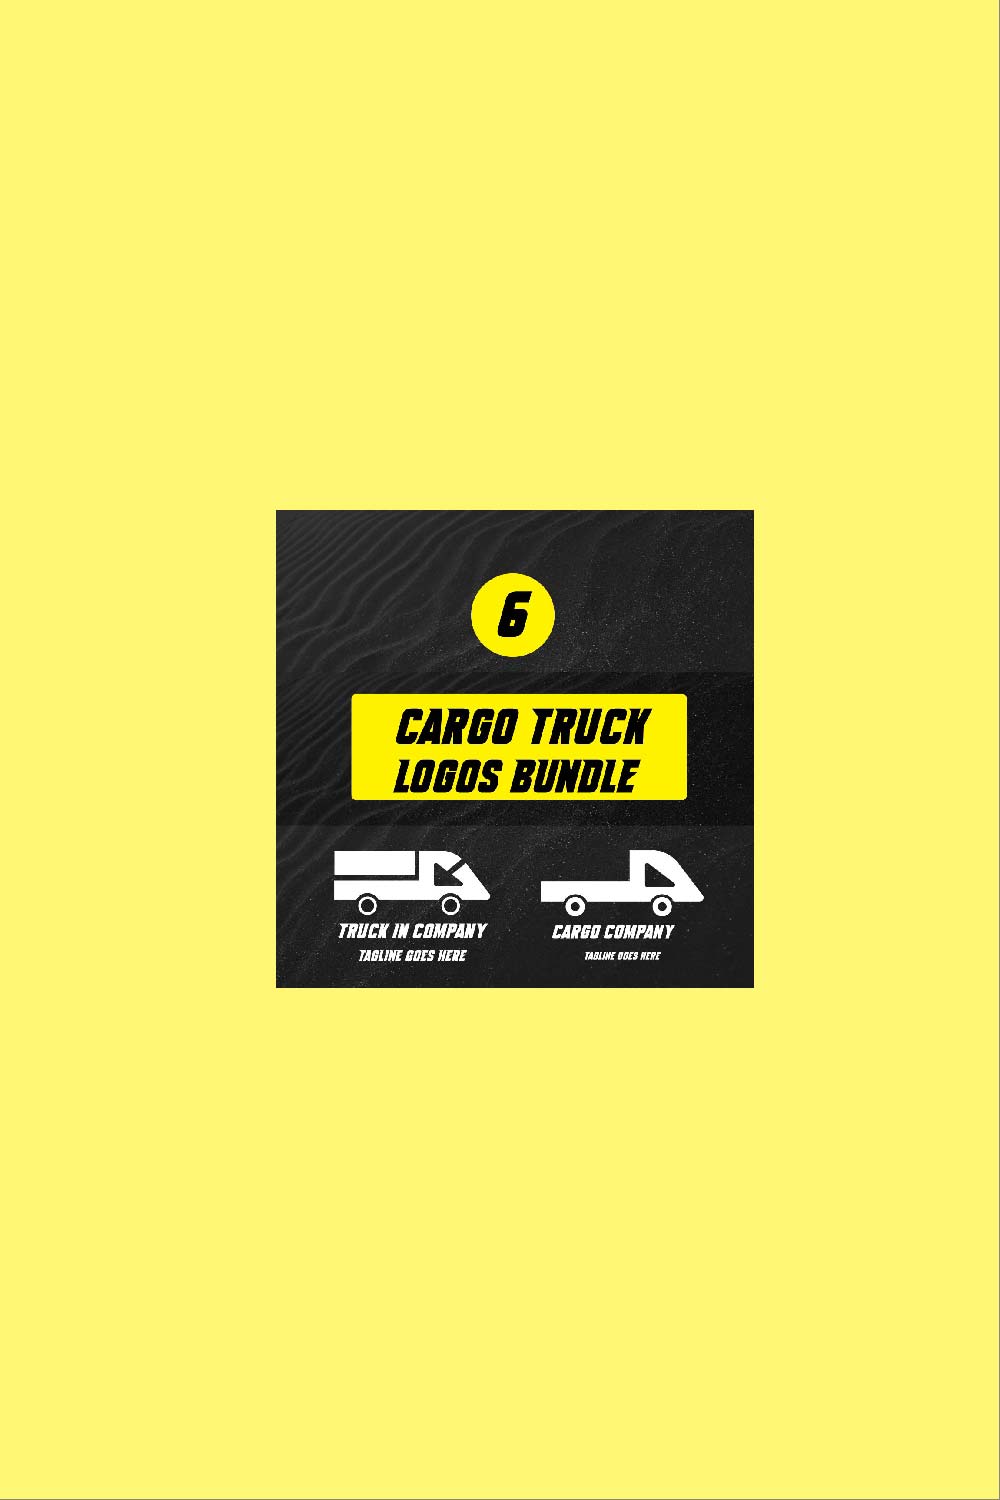 6 Cargo Truck Logo Templates for Only in $10 pinterest image.